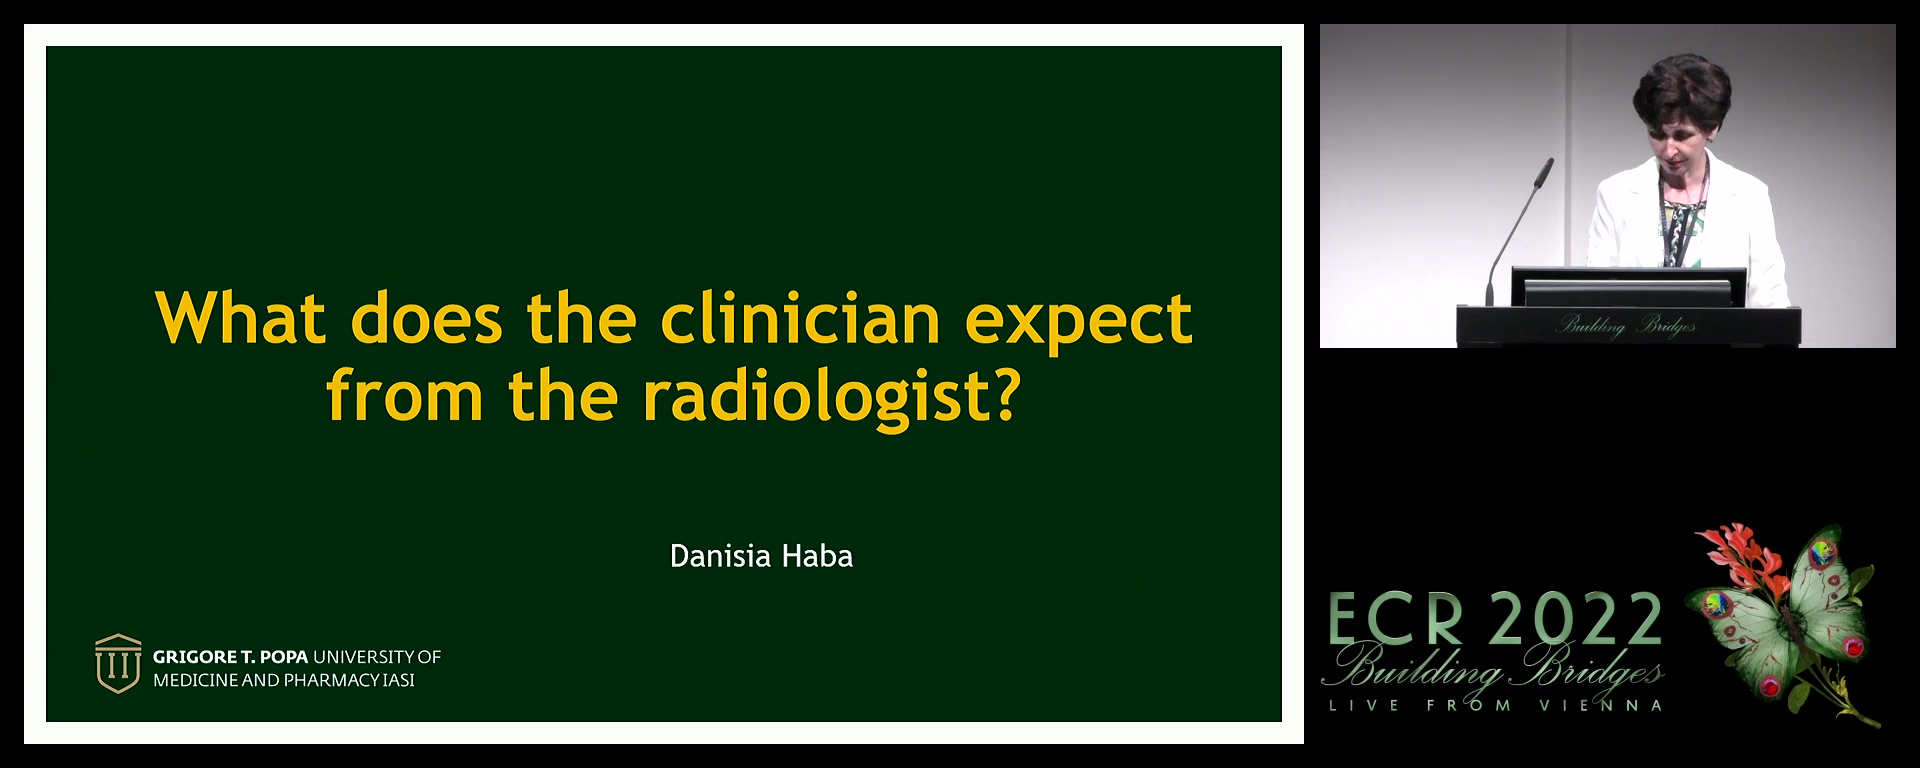 What does the clinician expect from the radiologist? - Danisia Haba, Iasi / RO